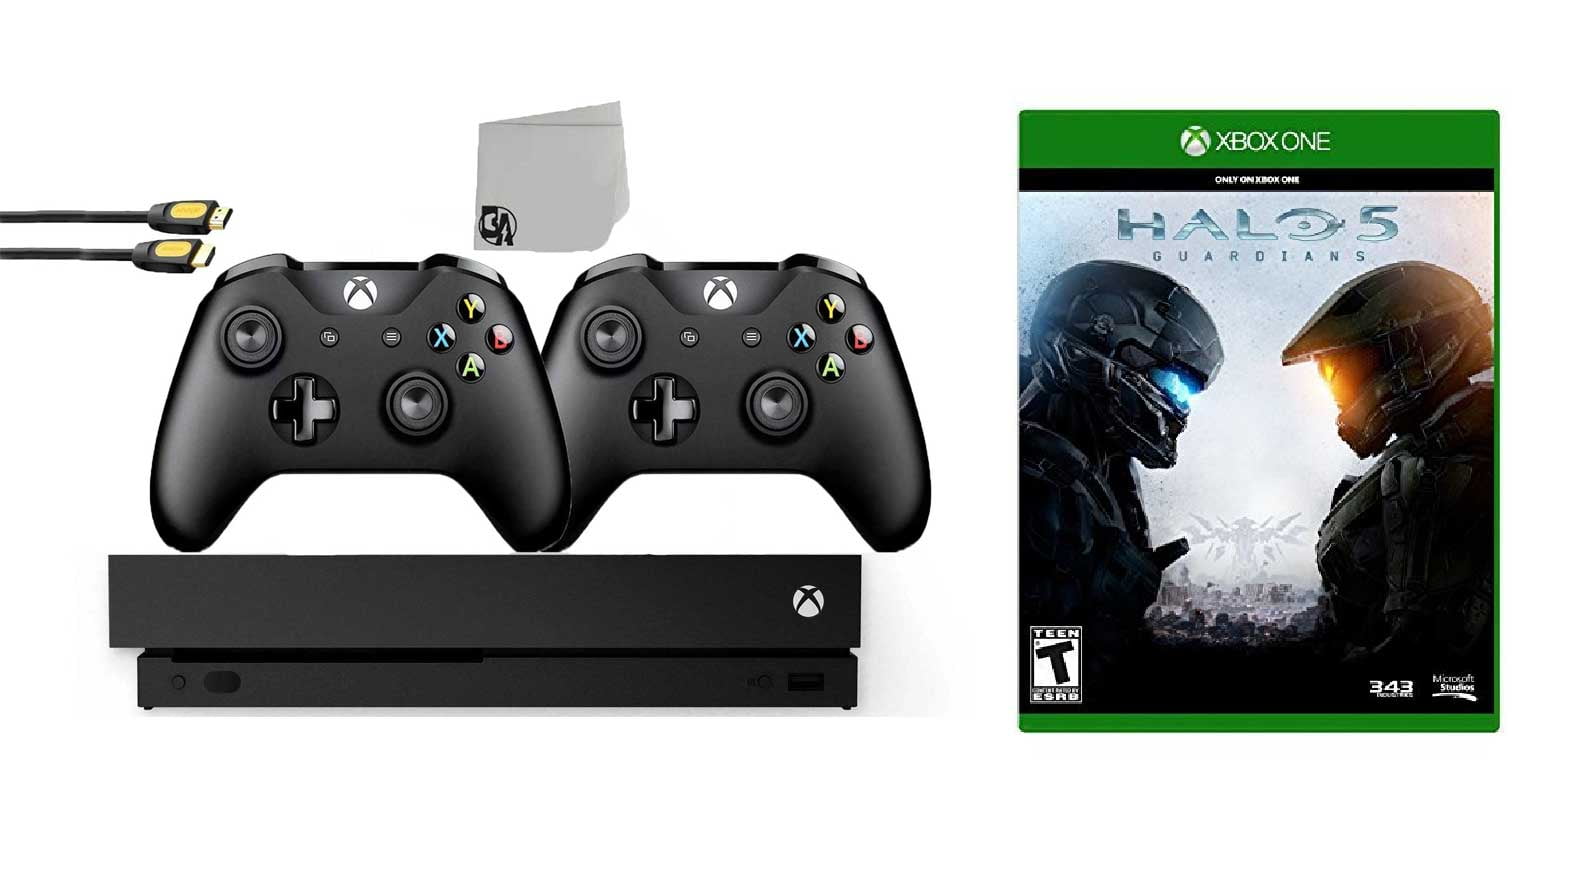 verkoudheid pad Gewoon doen Microsoft Xbox One X 1TB Gaming Console Black with 2 Controller Included  with Resident Evil 7 BOLT AXTION Bundle Used - Walmart.com